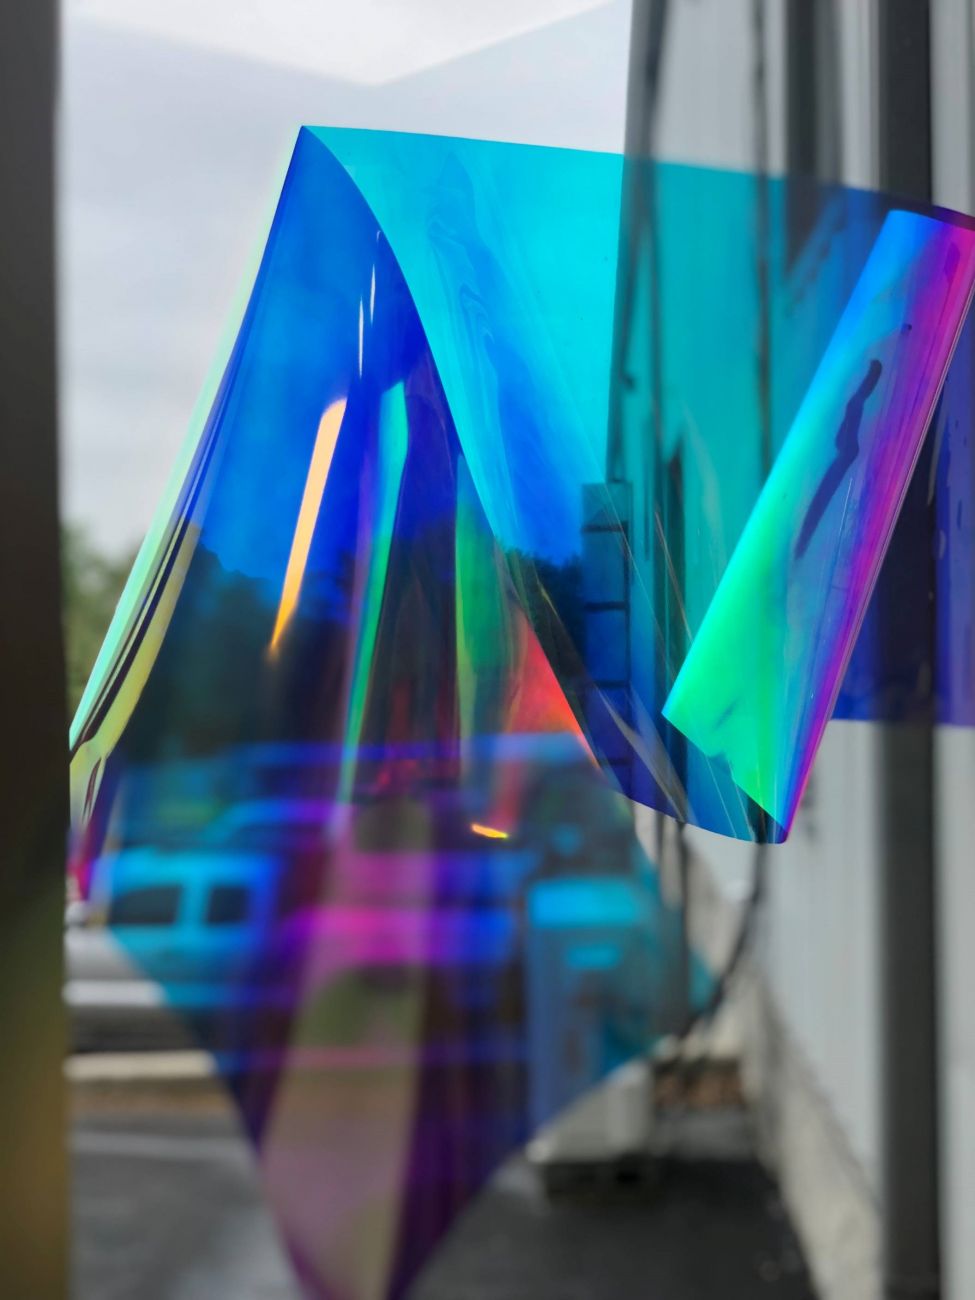 Dichroic Frost Window Film - Surface Designs